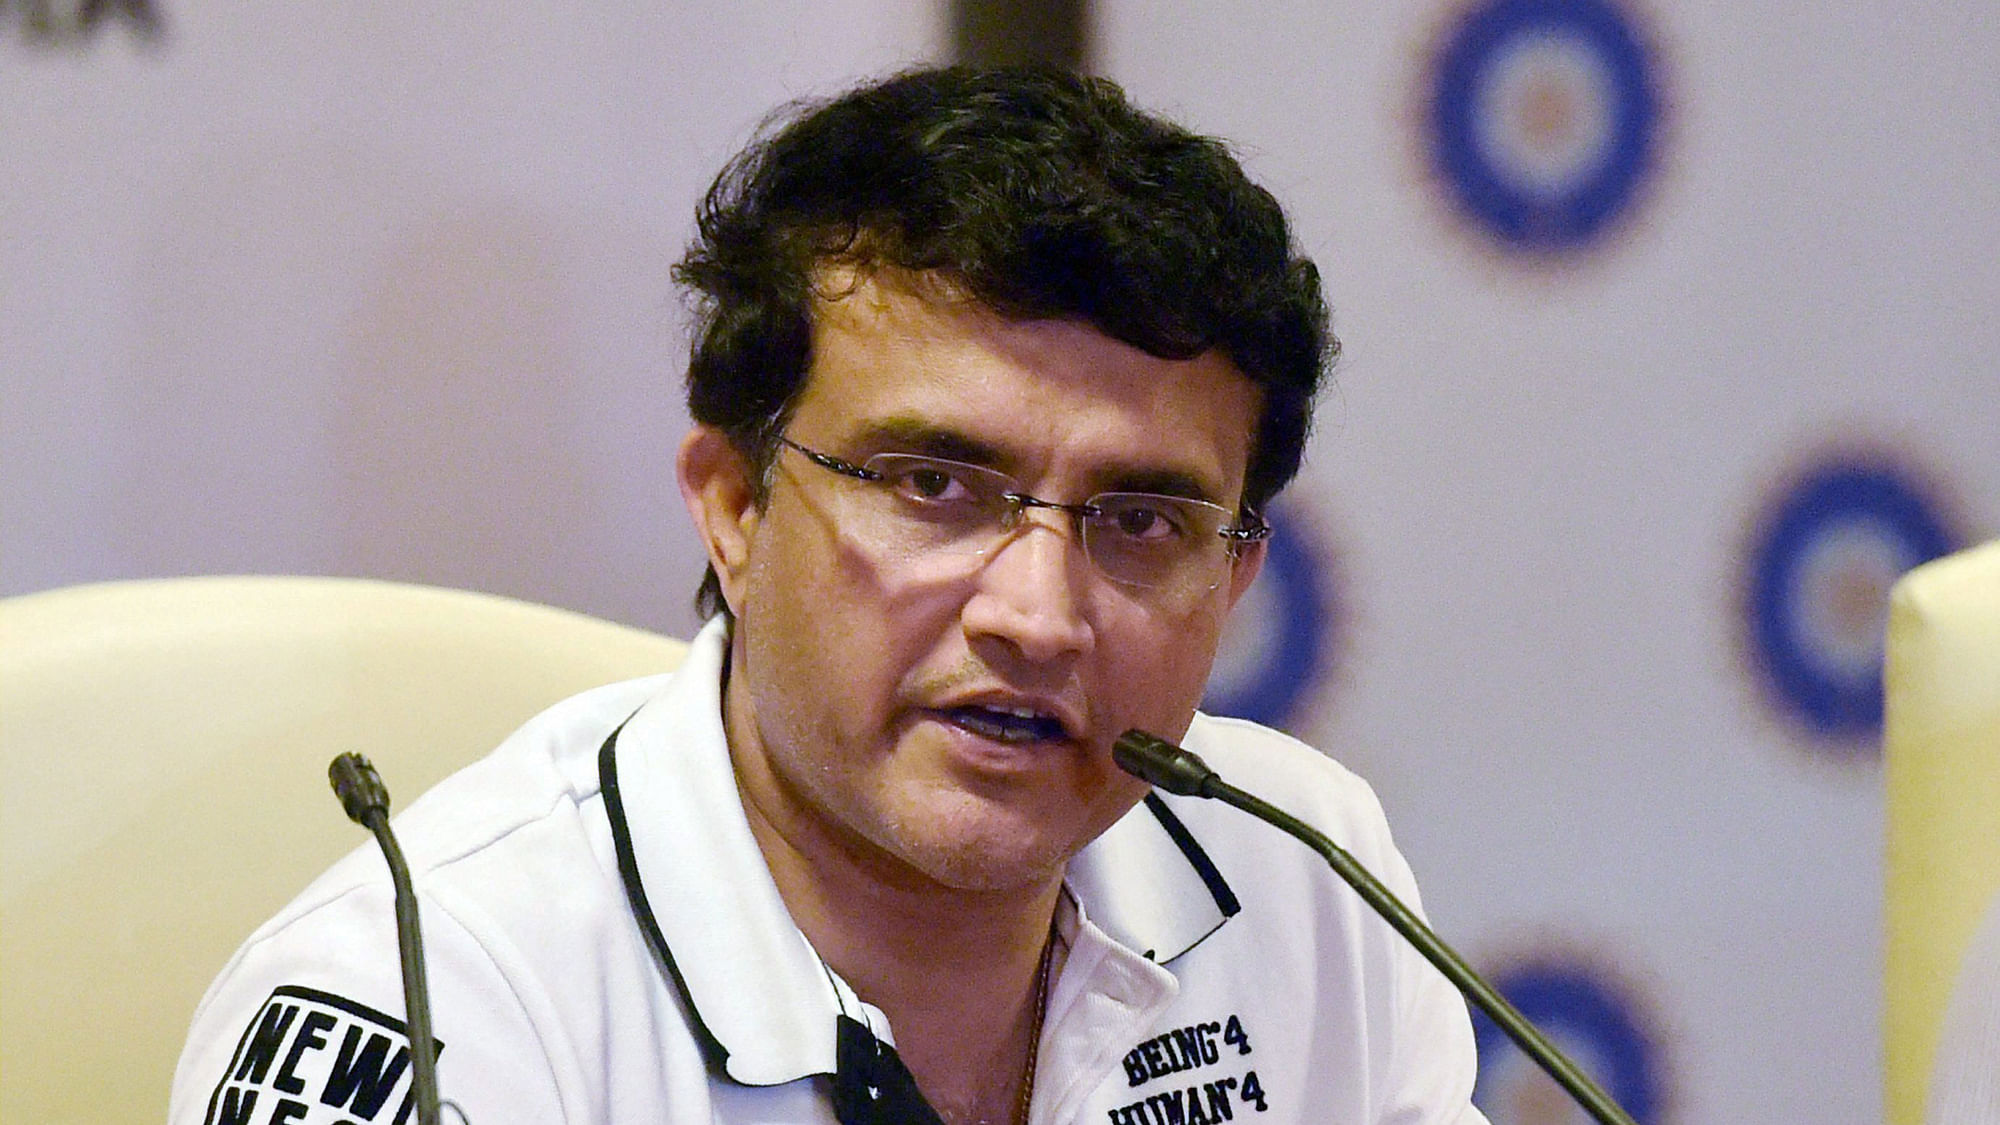 Ganguly’s elder brother Snehasish, a former Ranji Trophy player, has been diagnosed with dengue and was undergoing treatment.